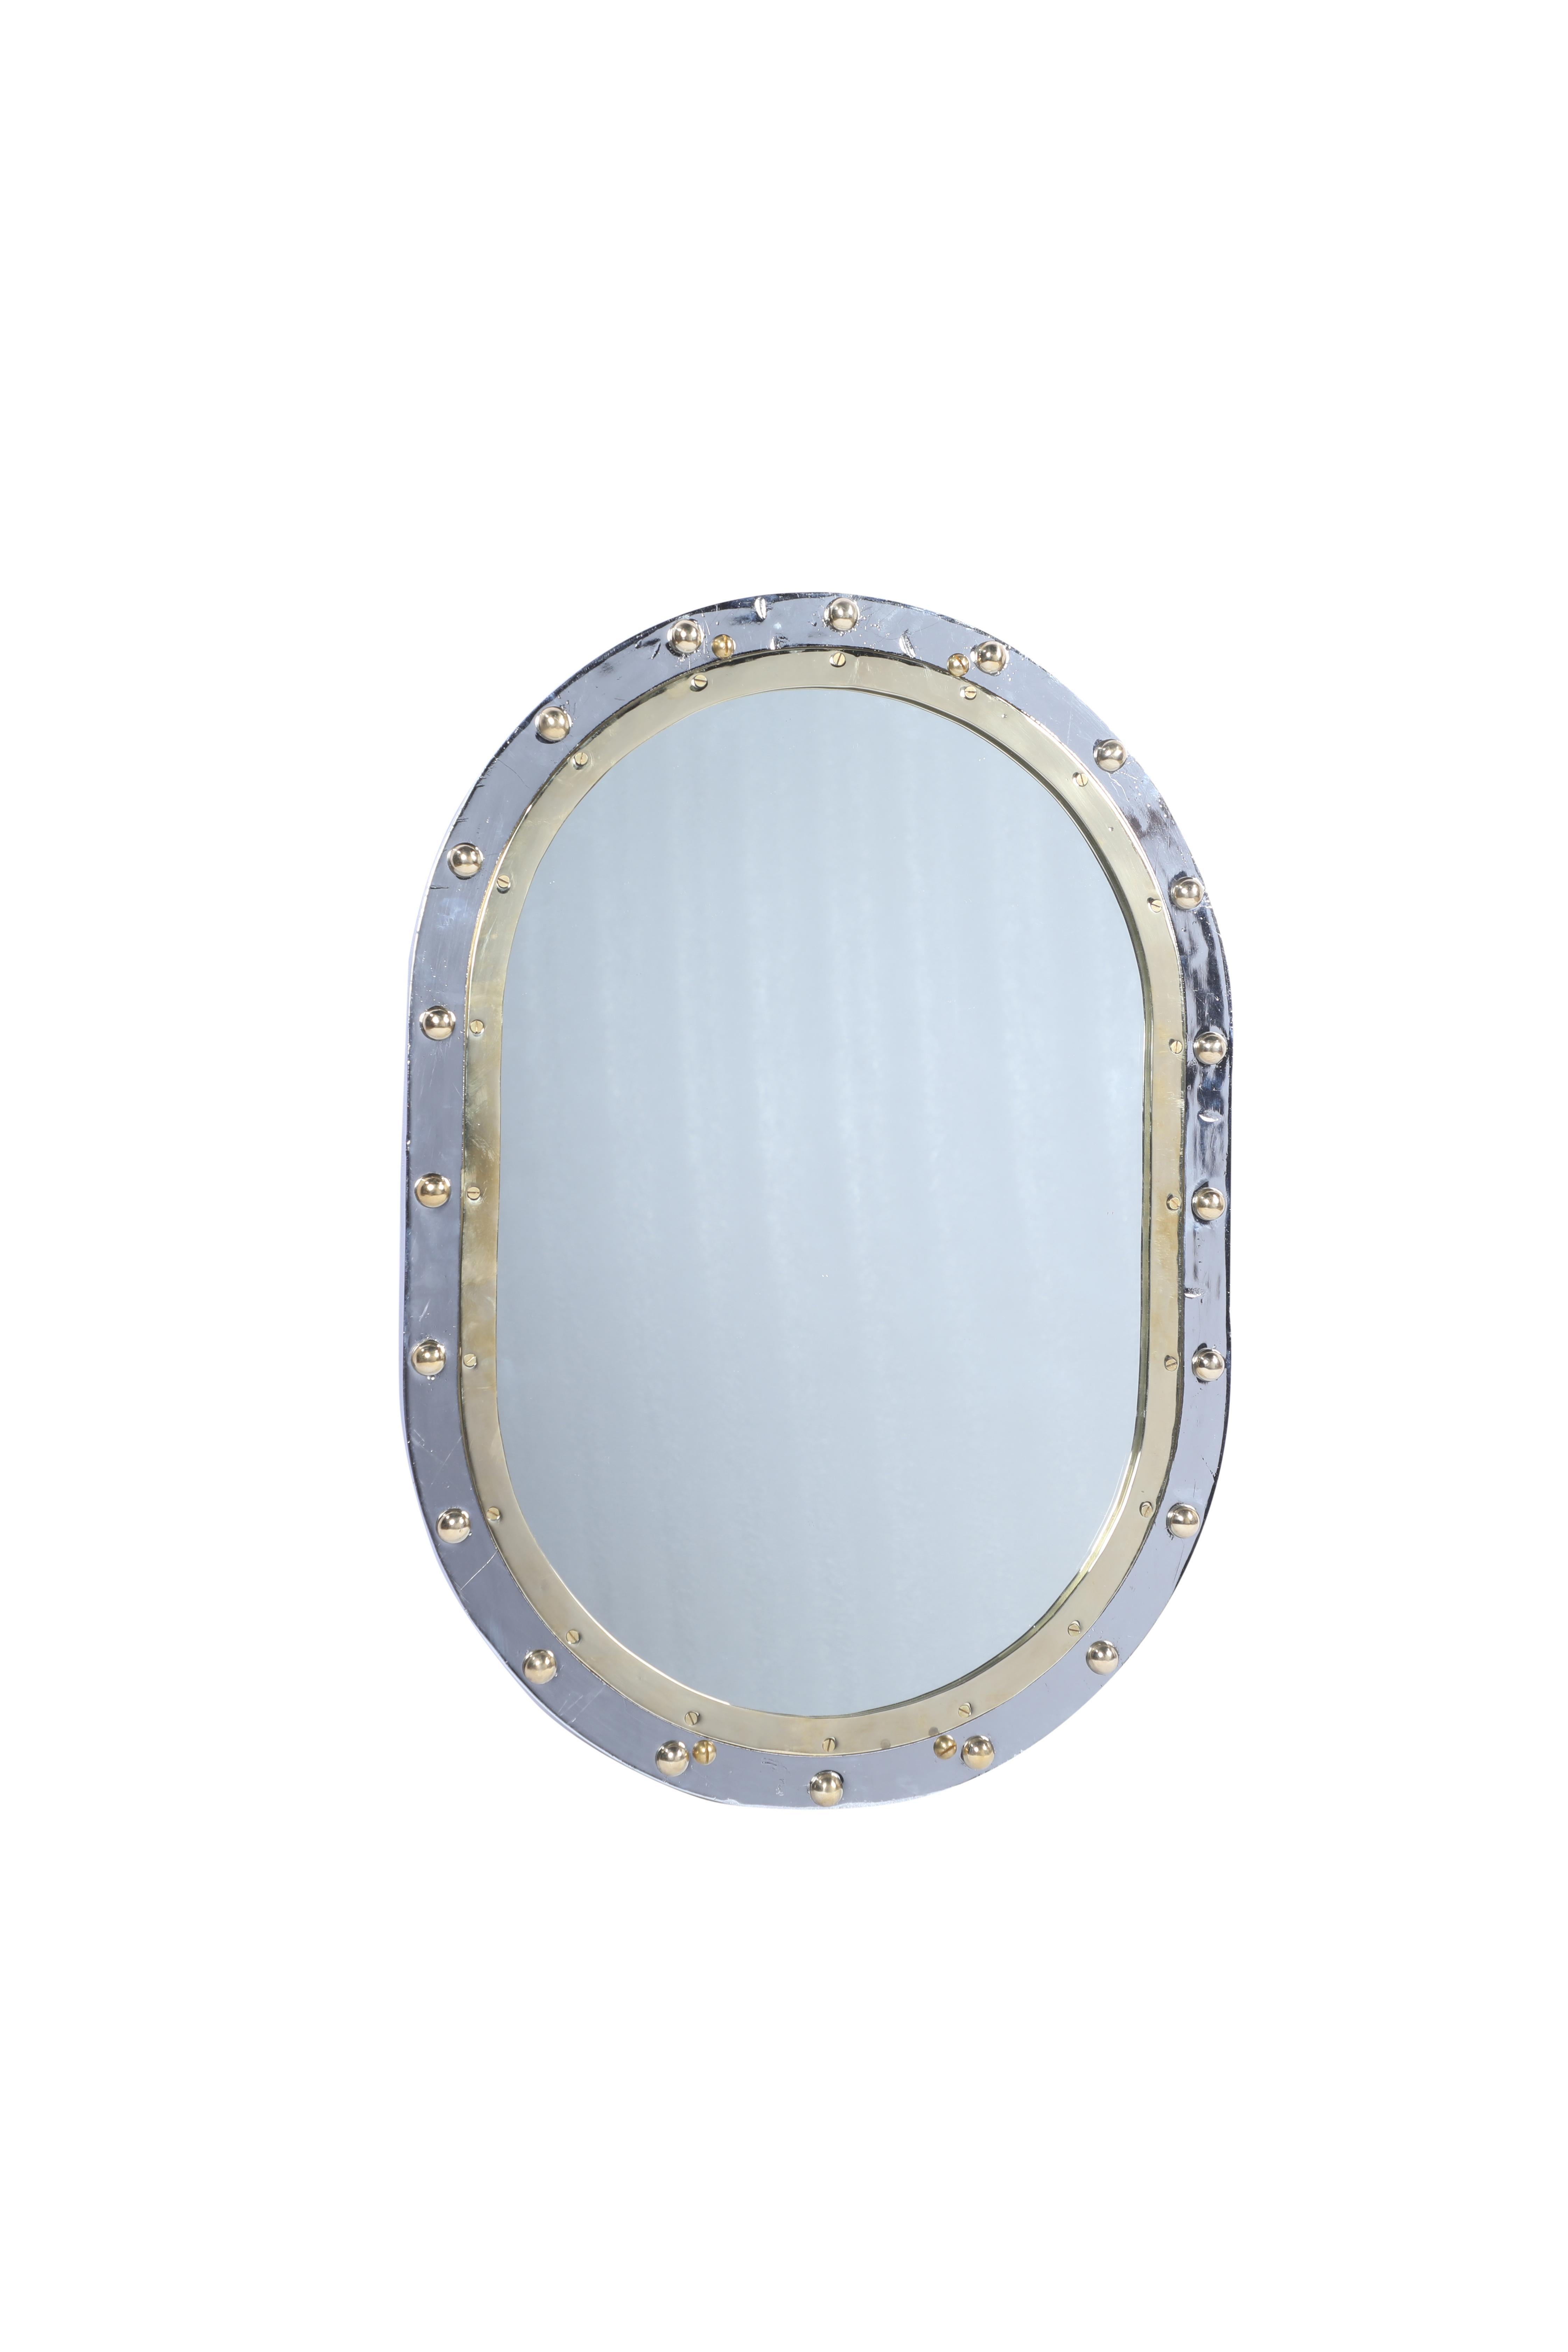 From a decommissioned ship, an oval fixed porthole window in a combination of chrome and brass converted by us into a mirror. Classic styling. Rivets were added as these come out when taken off ships. Two brass supports on the back for hanging and